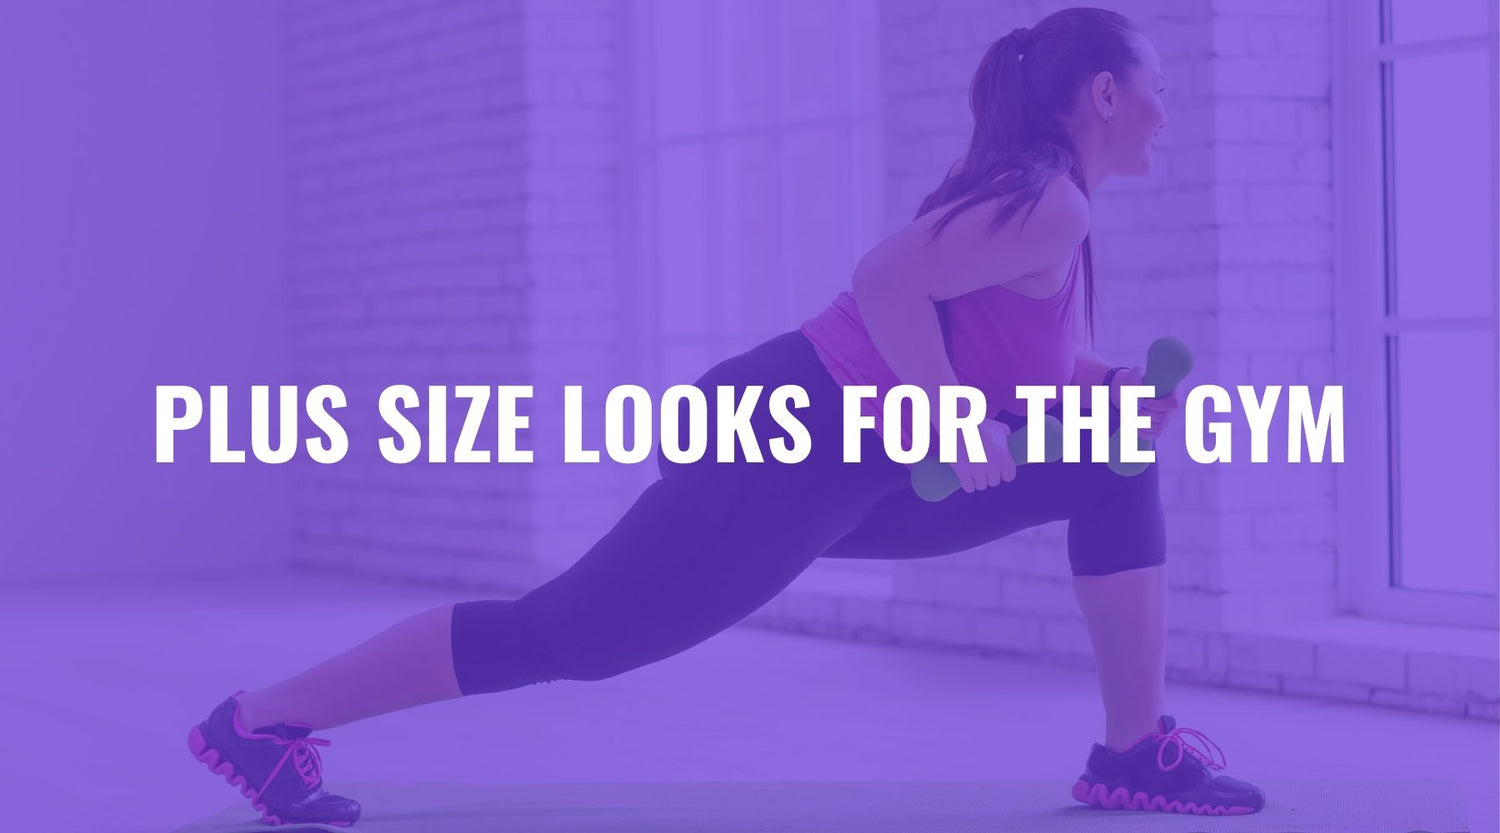 Plus Size Looks for the Gym